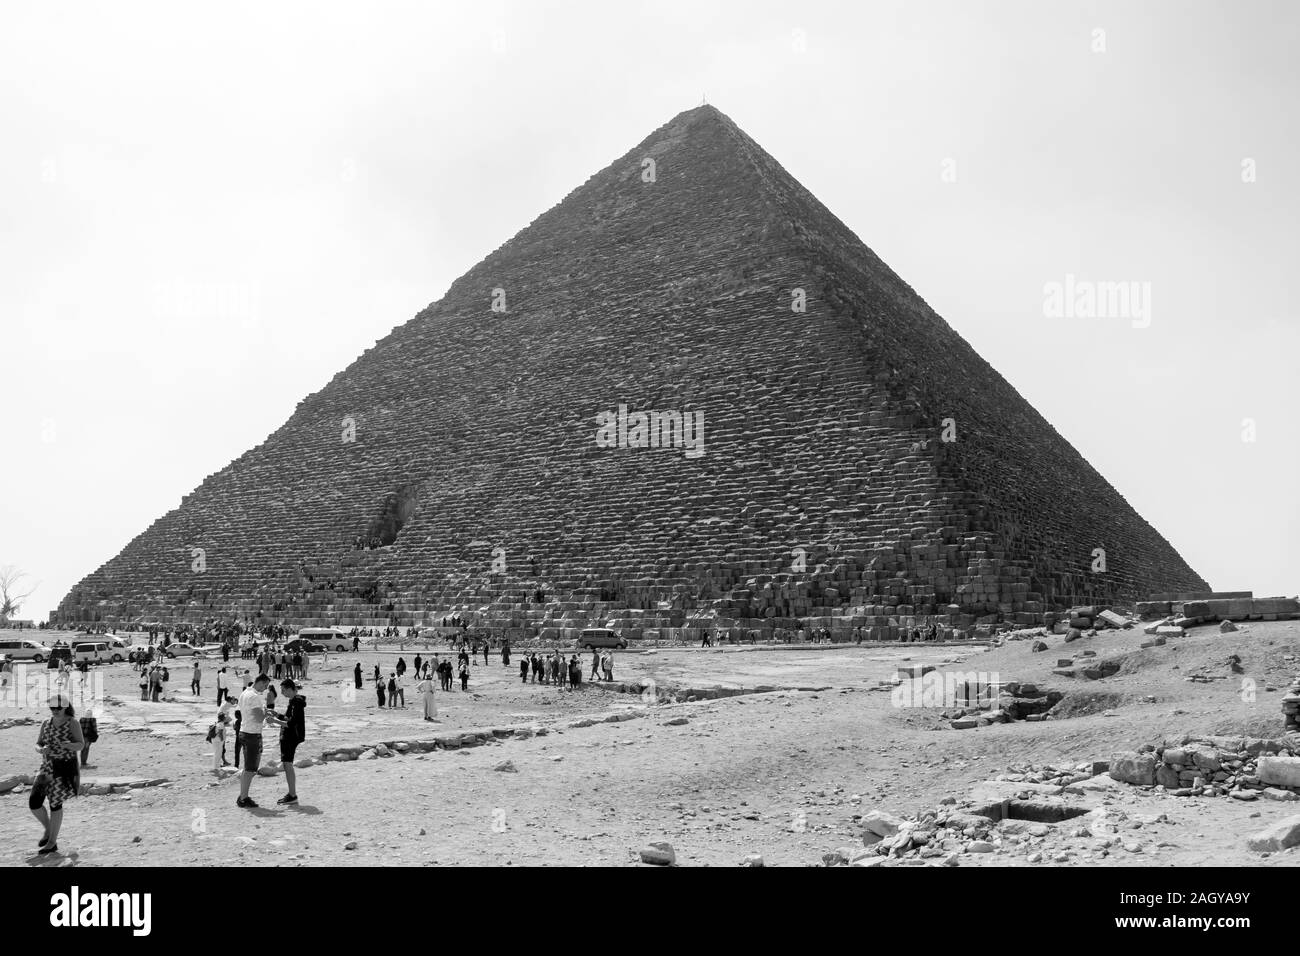 Giza, Egypt - April 19, 2019: The ancient Egyptian Pyramid of Khufu with ruins, tombs and monuments in Giza, Cairo, Egypt Stock Photo